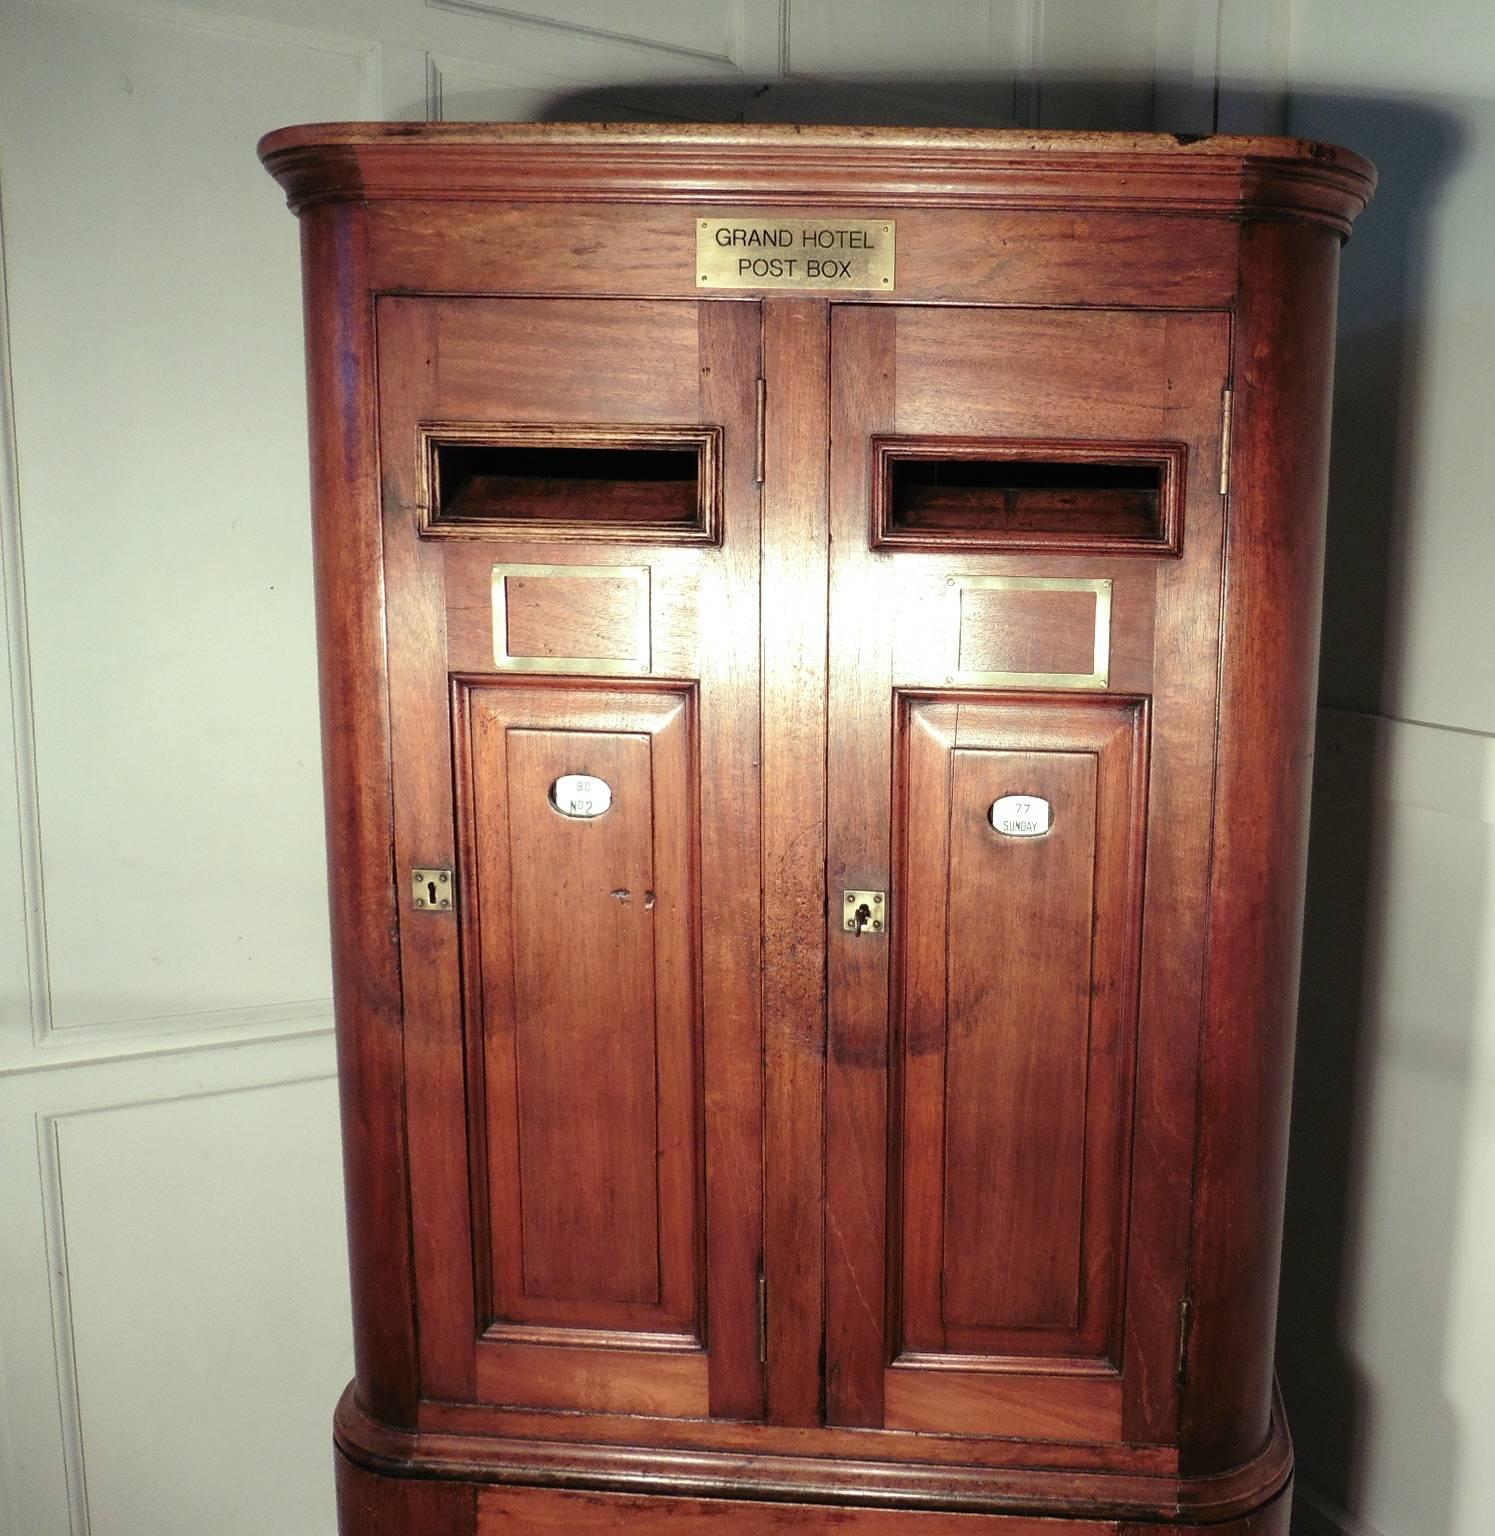 A Large Victorian Hotel Post Box, Country House Letter Box.

This handsome 2 Door piece came from the South of England, we believe the Grand Hotel on the lable to be the Grand Hotel Brighton
The Post Box is made in Solid Mahogany, which would